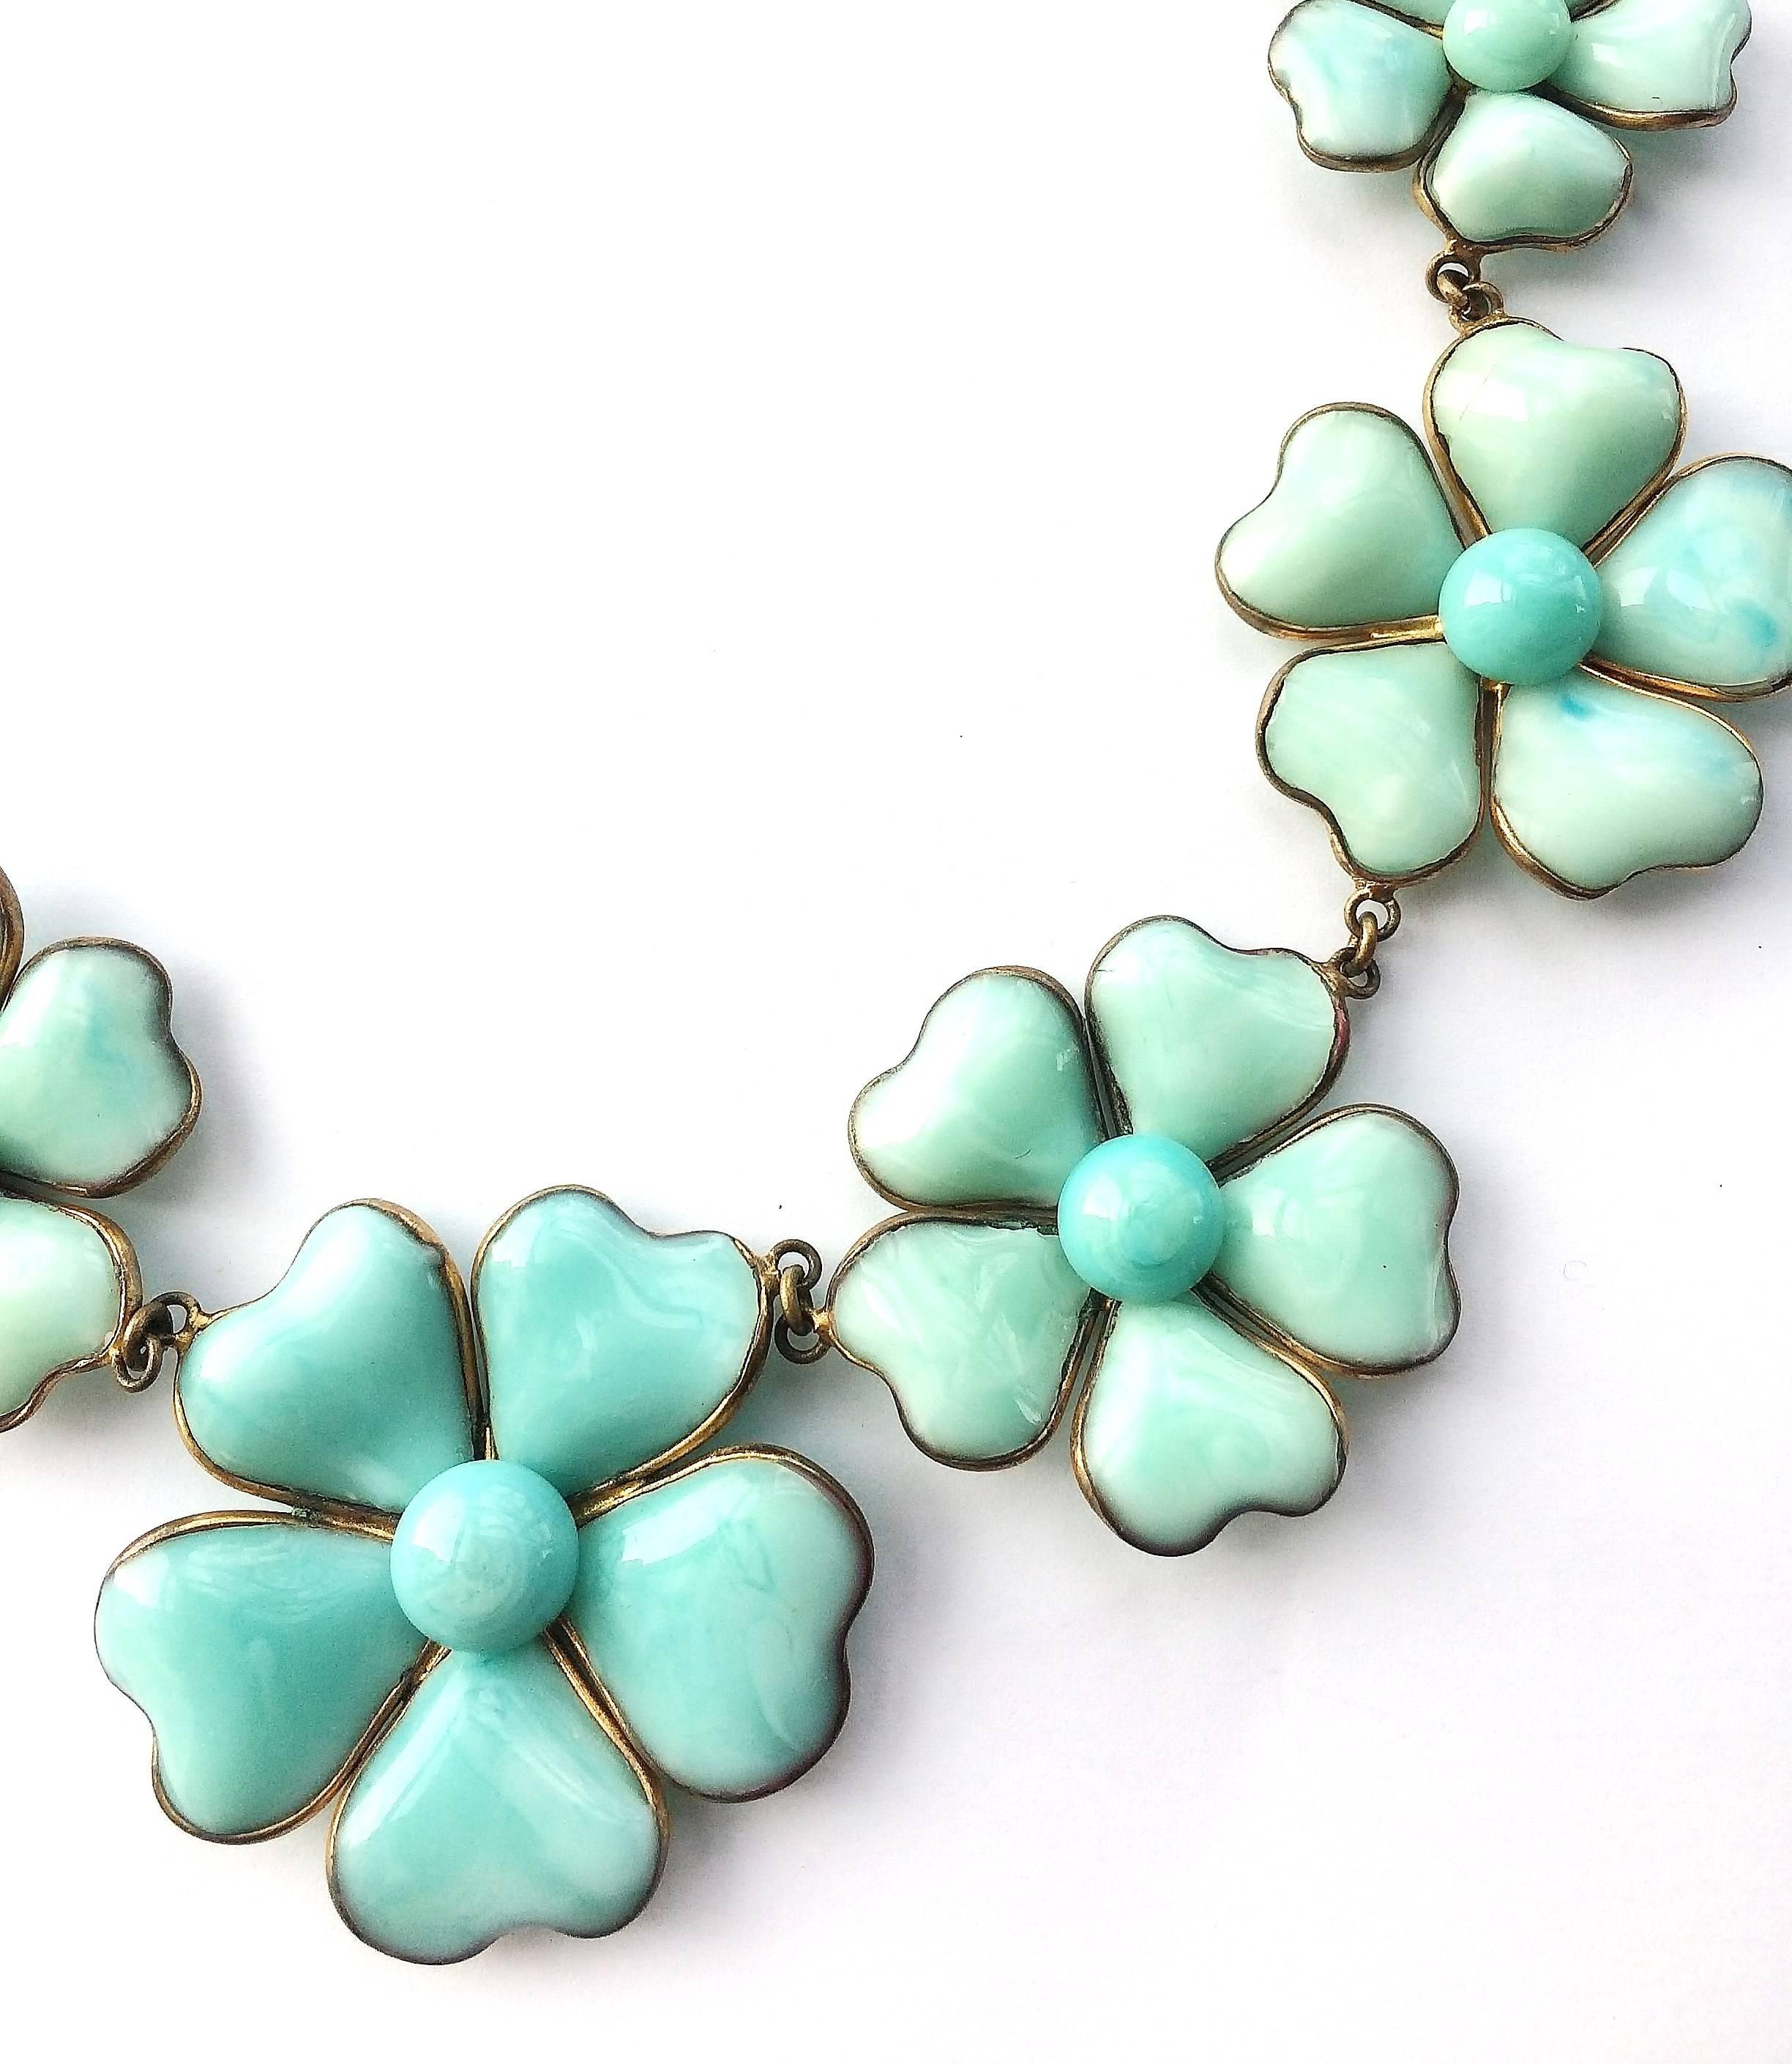 Women's A very rare iconic Chanel poured glass 'camellia' necklace, 1930s